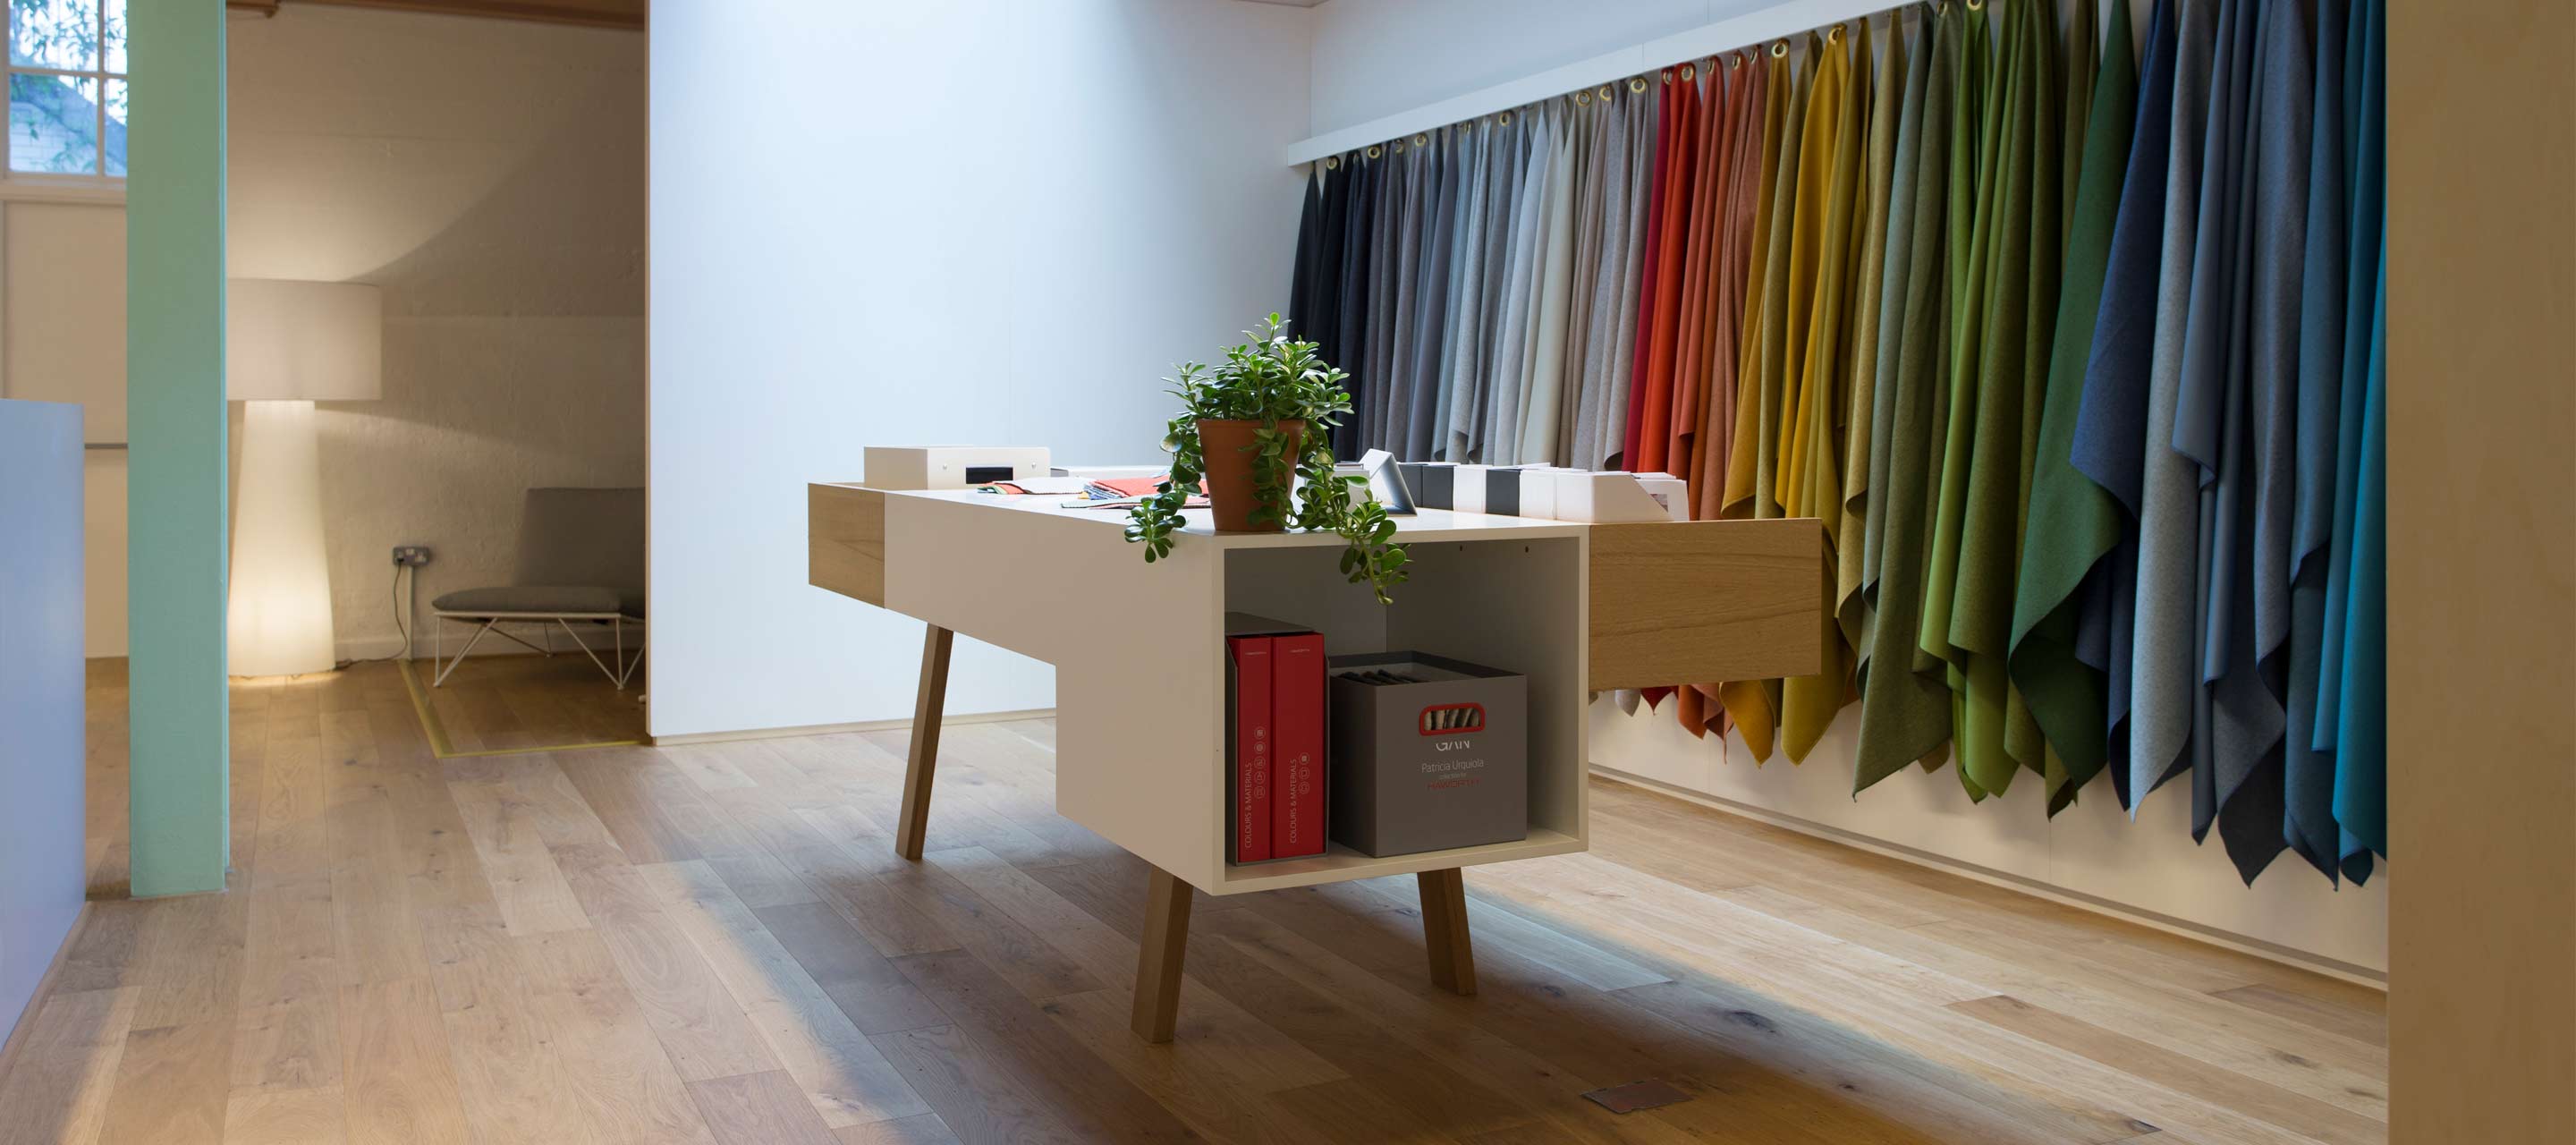 Visitors to the London showroom can feel our fabrics and see the finishes at this colors and materials sample station.